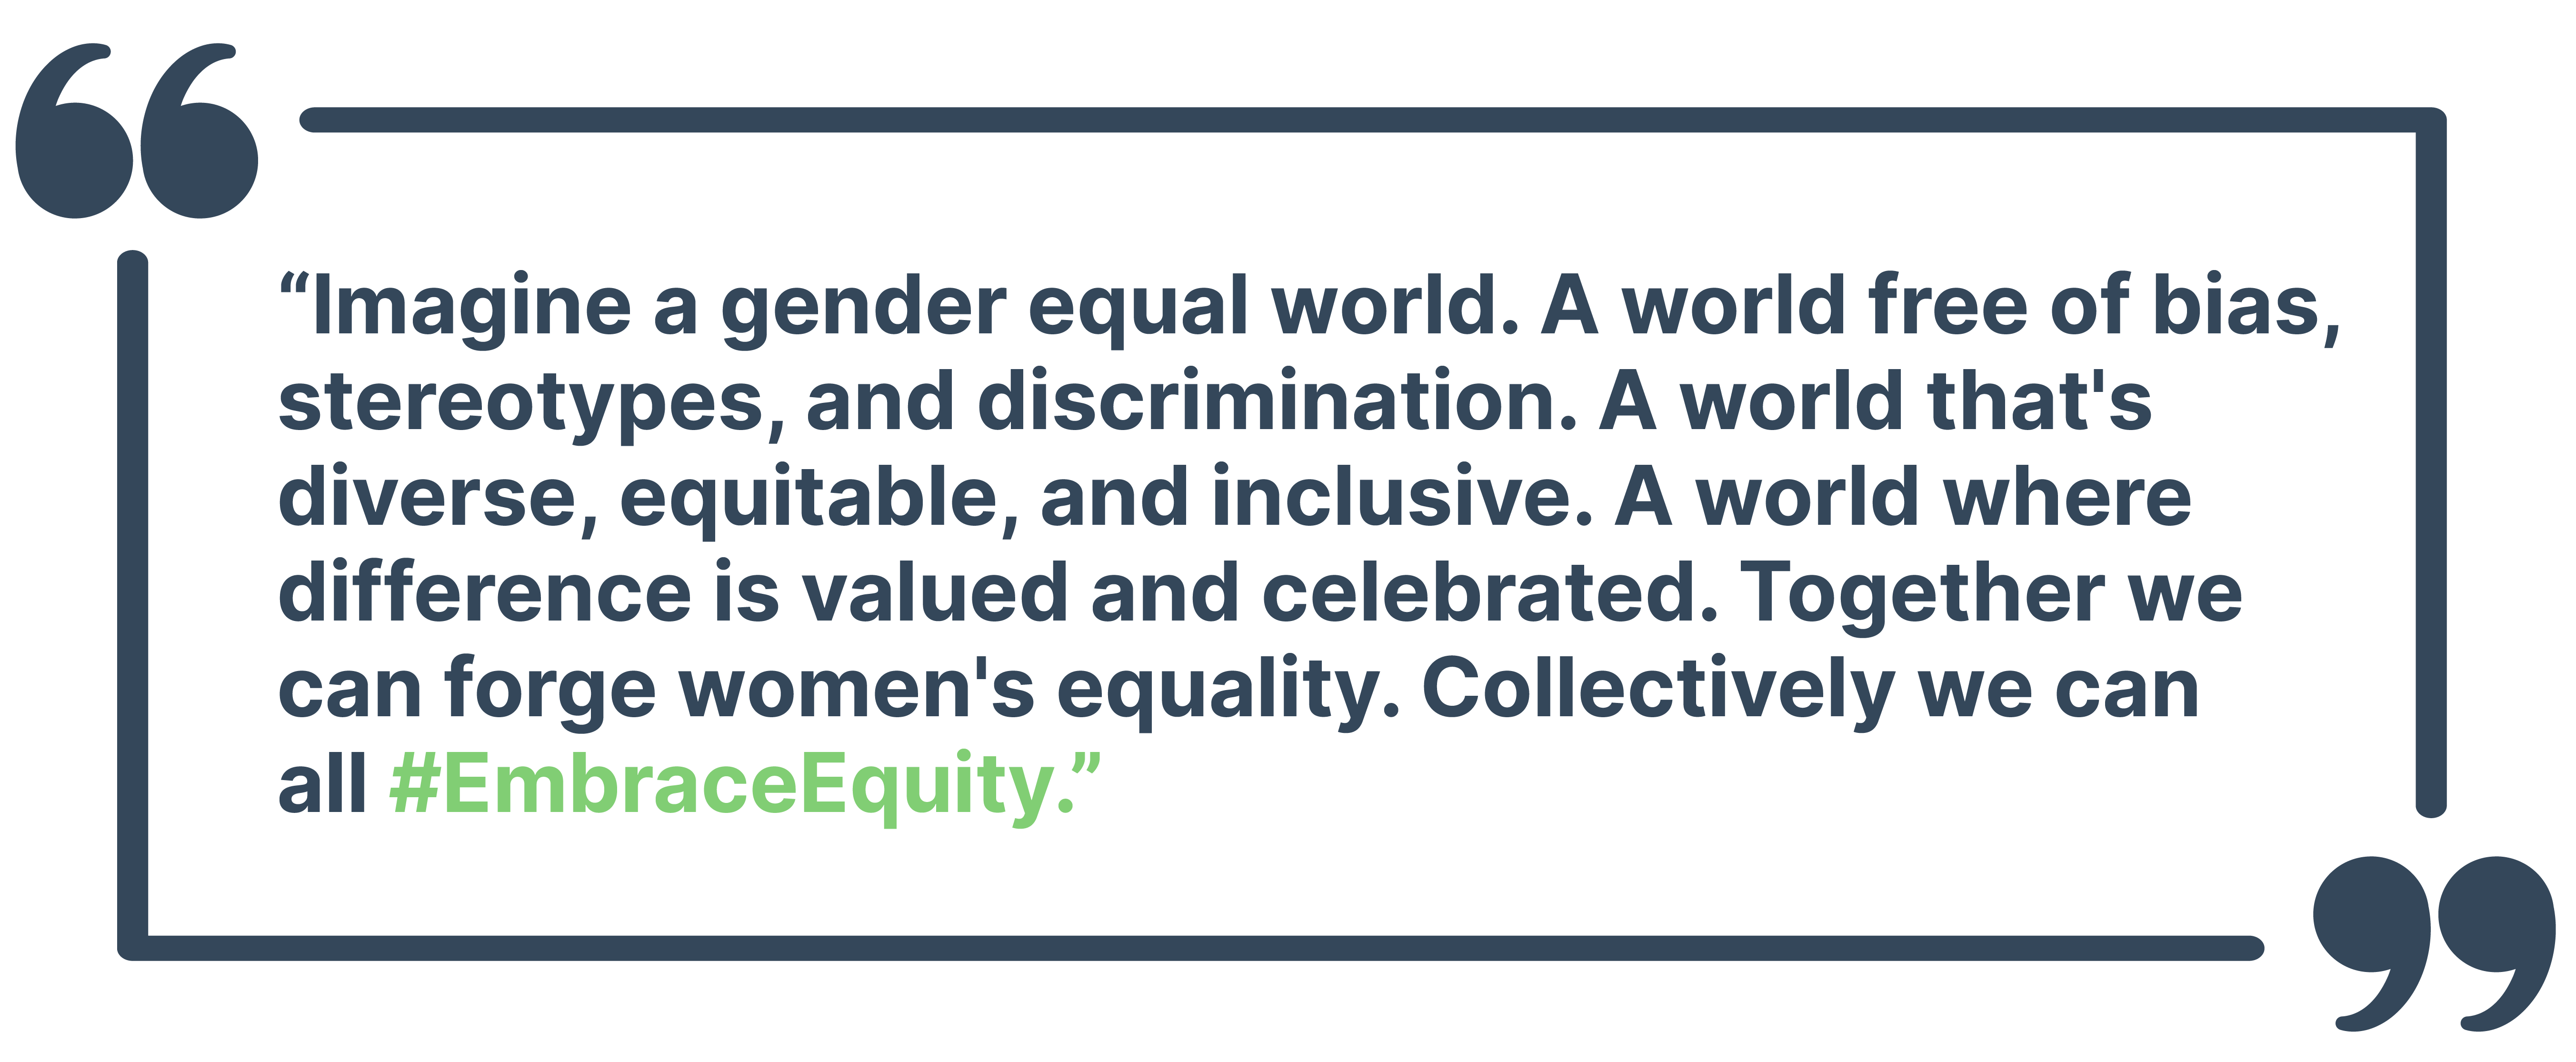 “Imagine a gender equal world. A world free of bias, stereotypes, and discrimination. A world that's diverse, equitable, and inclusive. A world where difference is valued and celebrated. Together we can forge women's equality. Collectively we can all #EmbraceEquity.”